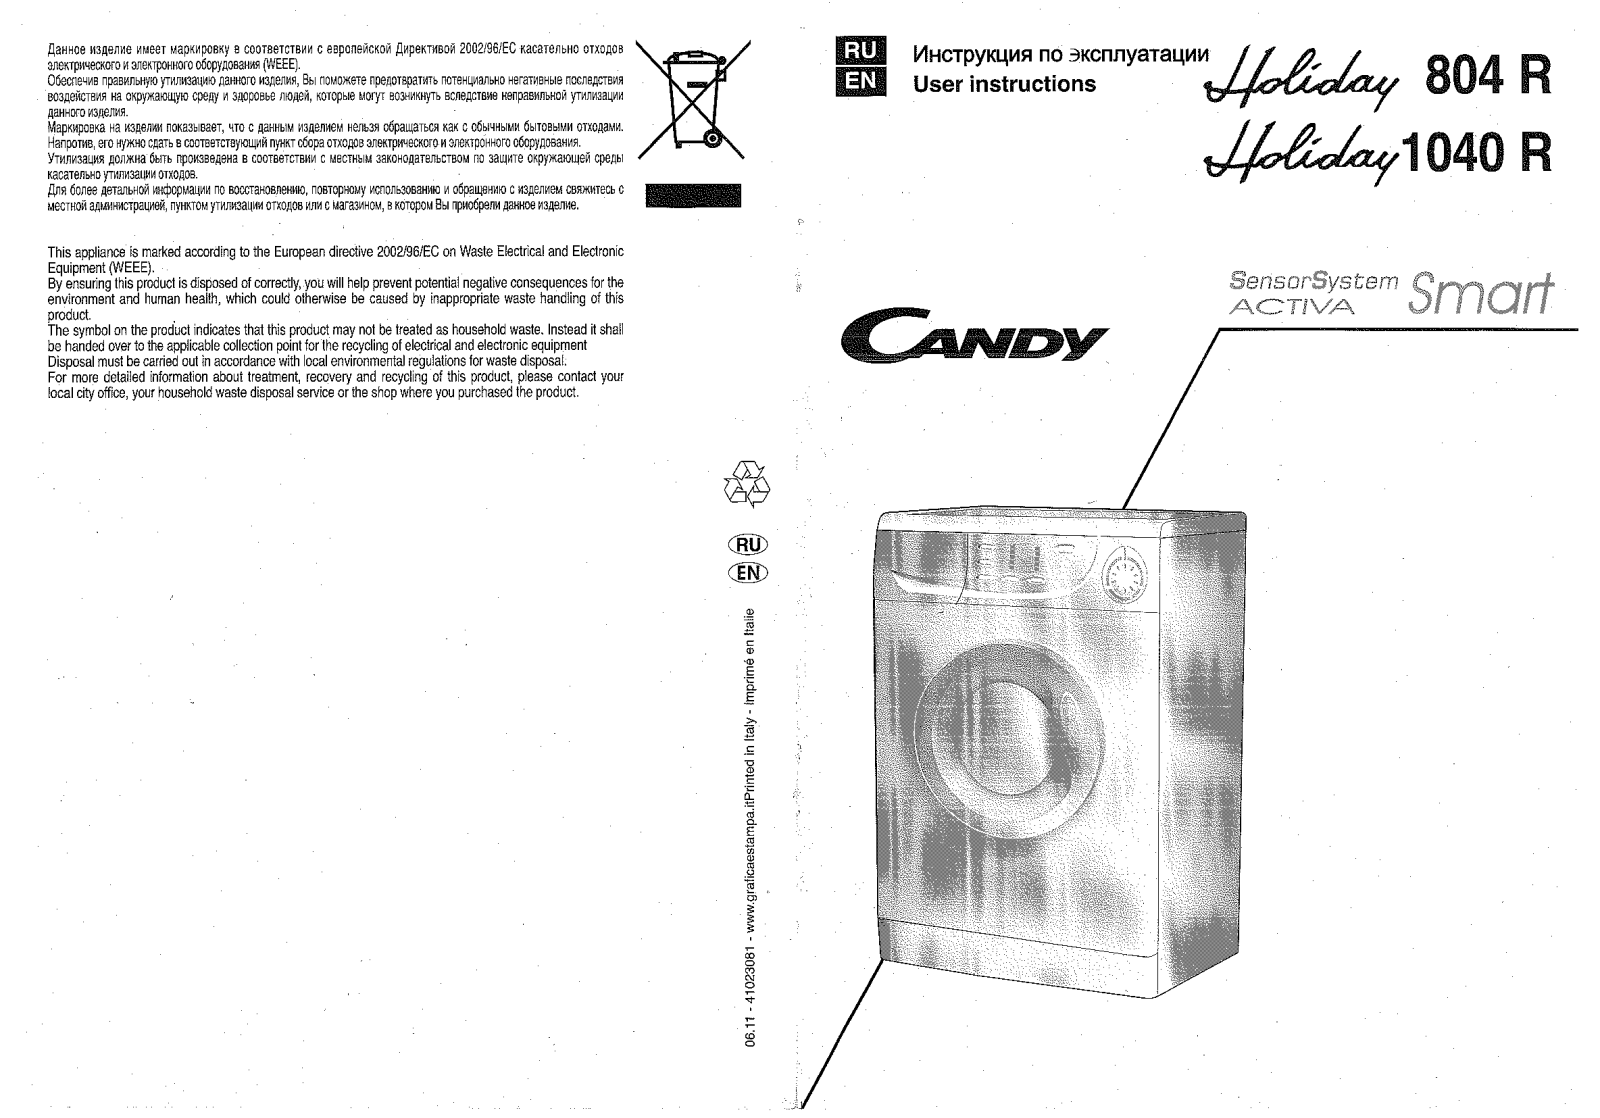 CANDY HOLIDAY 1040 R User Manual